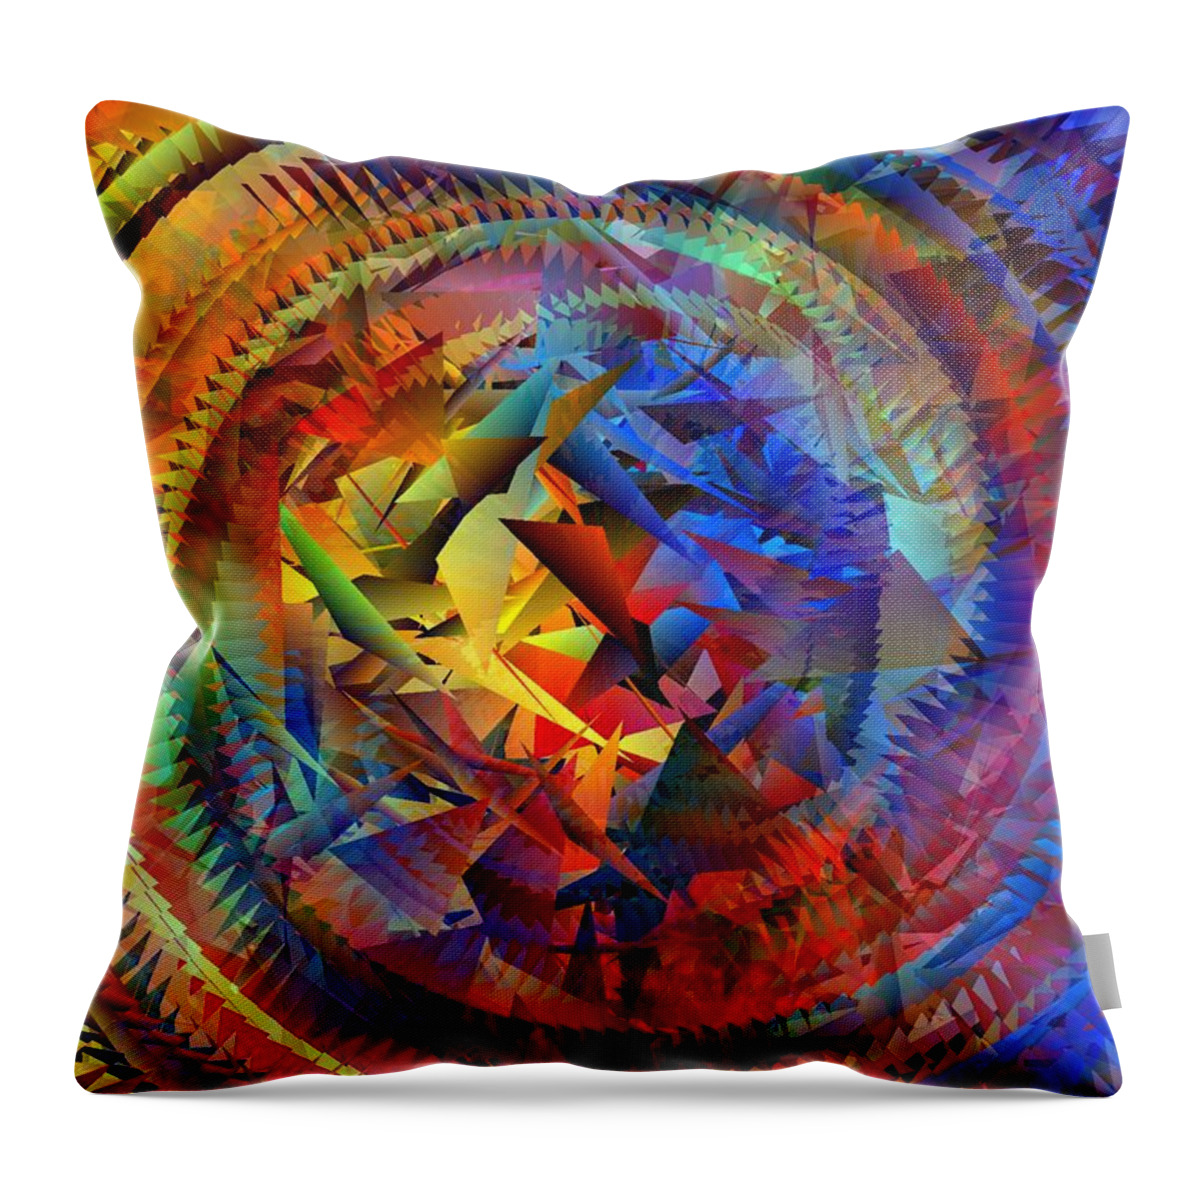 Colorful Throw Pillow featuring the digital art Colorful Crash 10 by Chris Butler